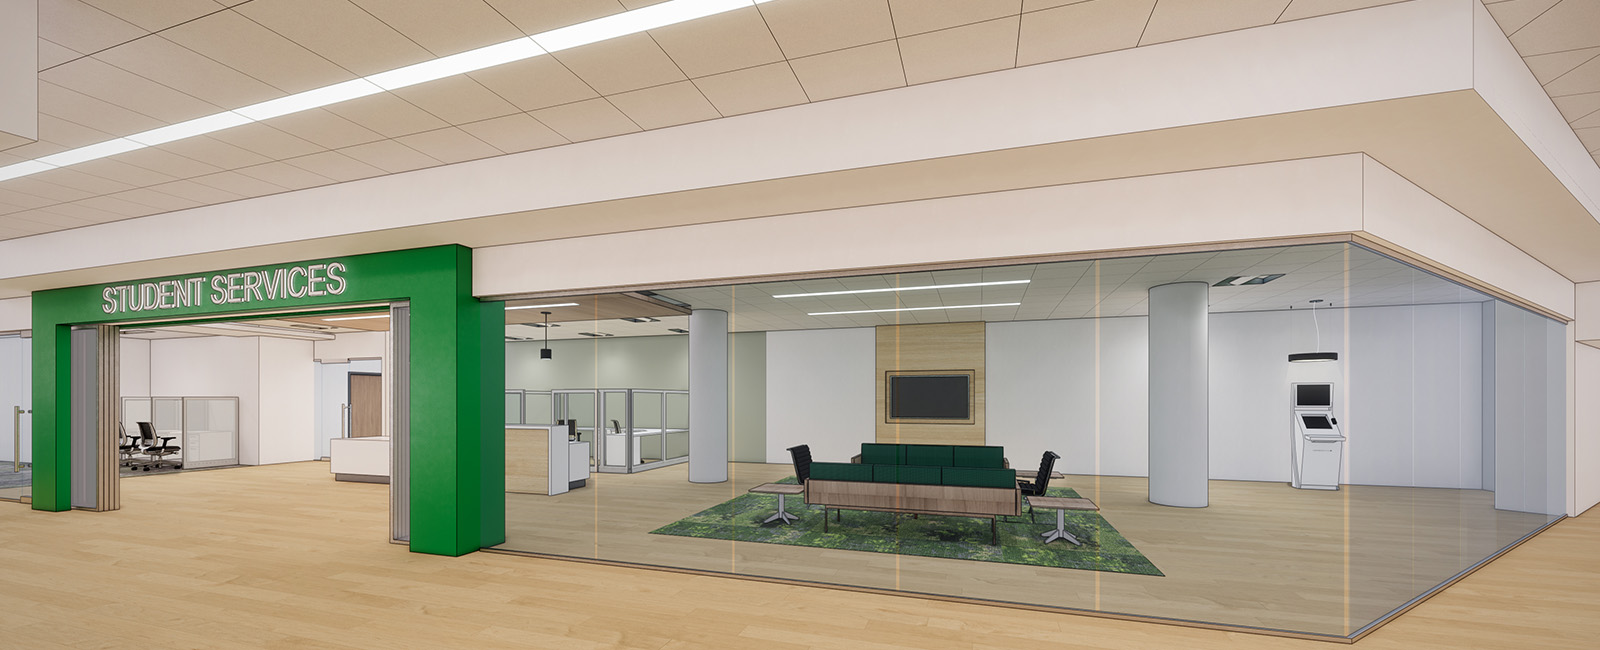 Rendering of the new service center lobby